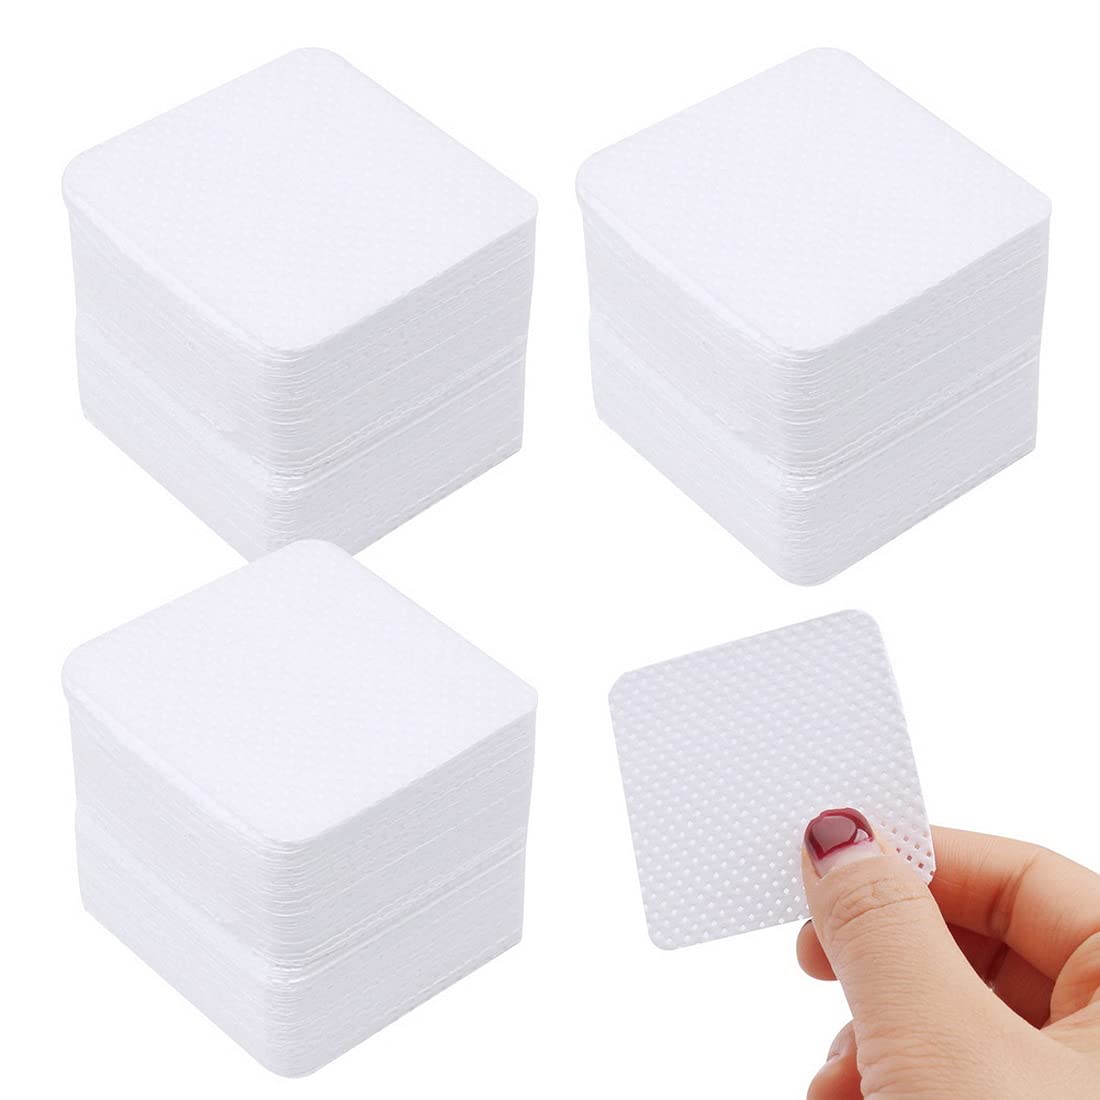 600 Pcs Lint Free Wipes For Nails, Nail Wipe Pads Lint Free Wipes Nail Art UV Gel Polish Absorbent Remover Wipes Meltblown for Diy Nail